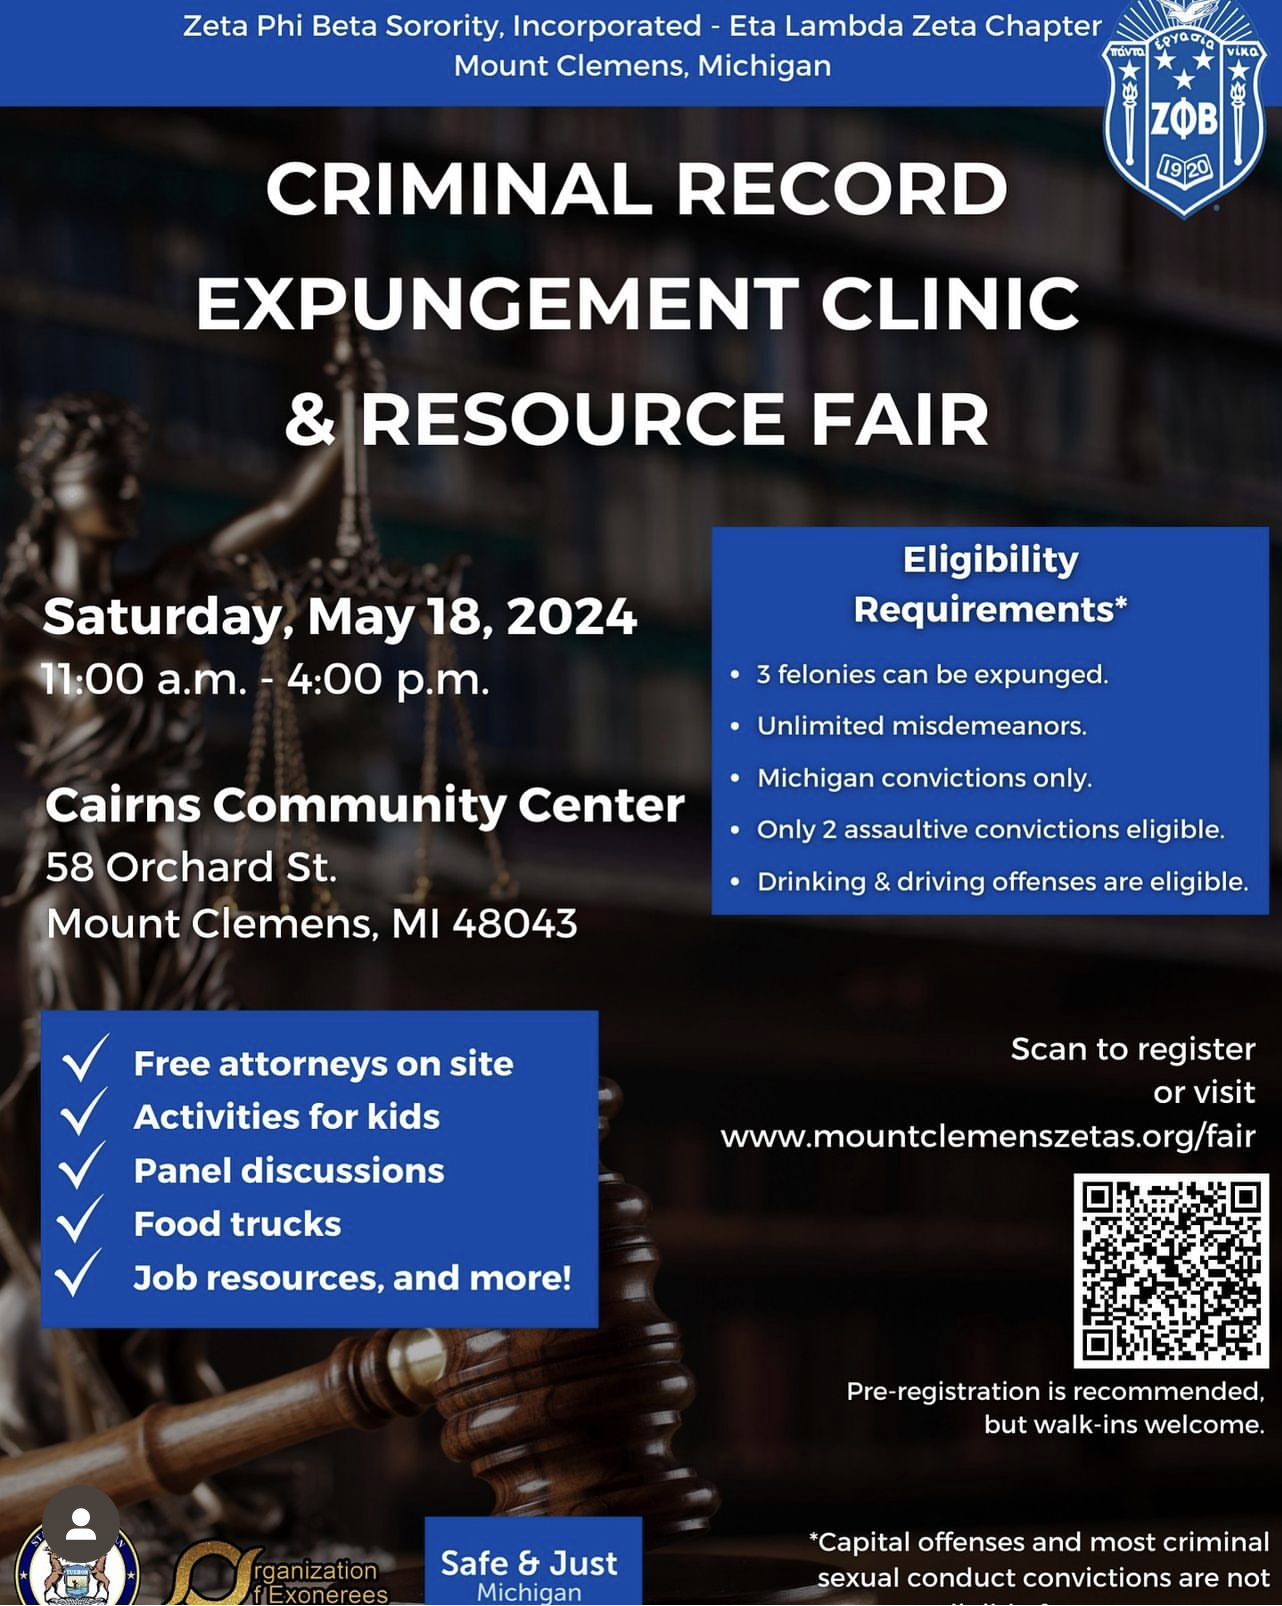 CRIMINAL RECORD EXPUNGEMENT CLINIC & RESOURCE FAIR